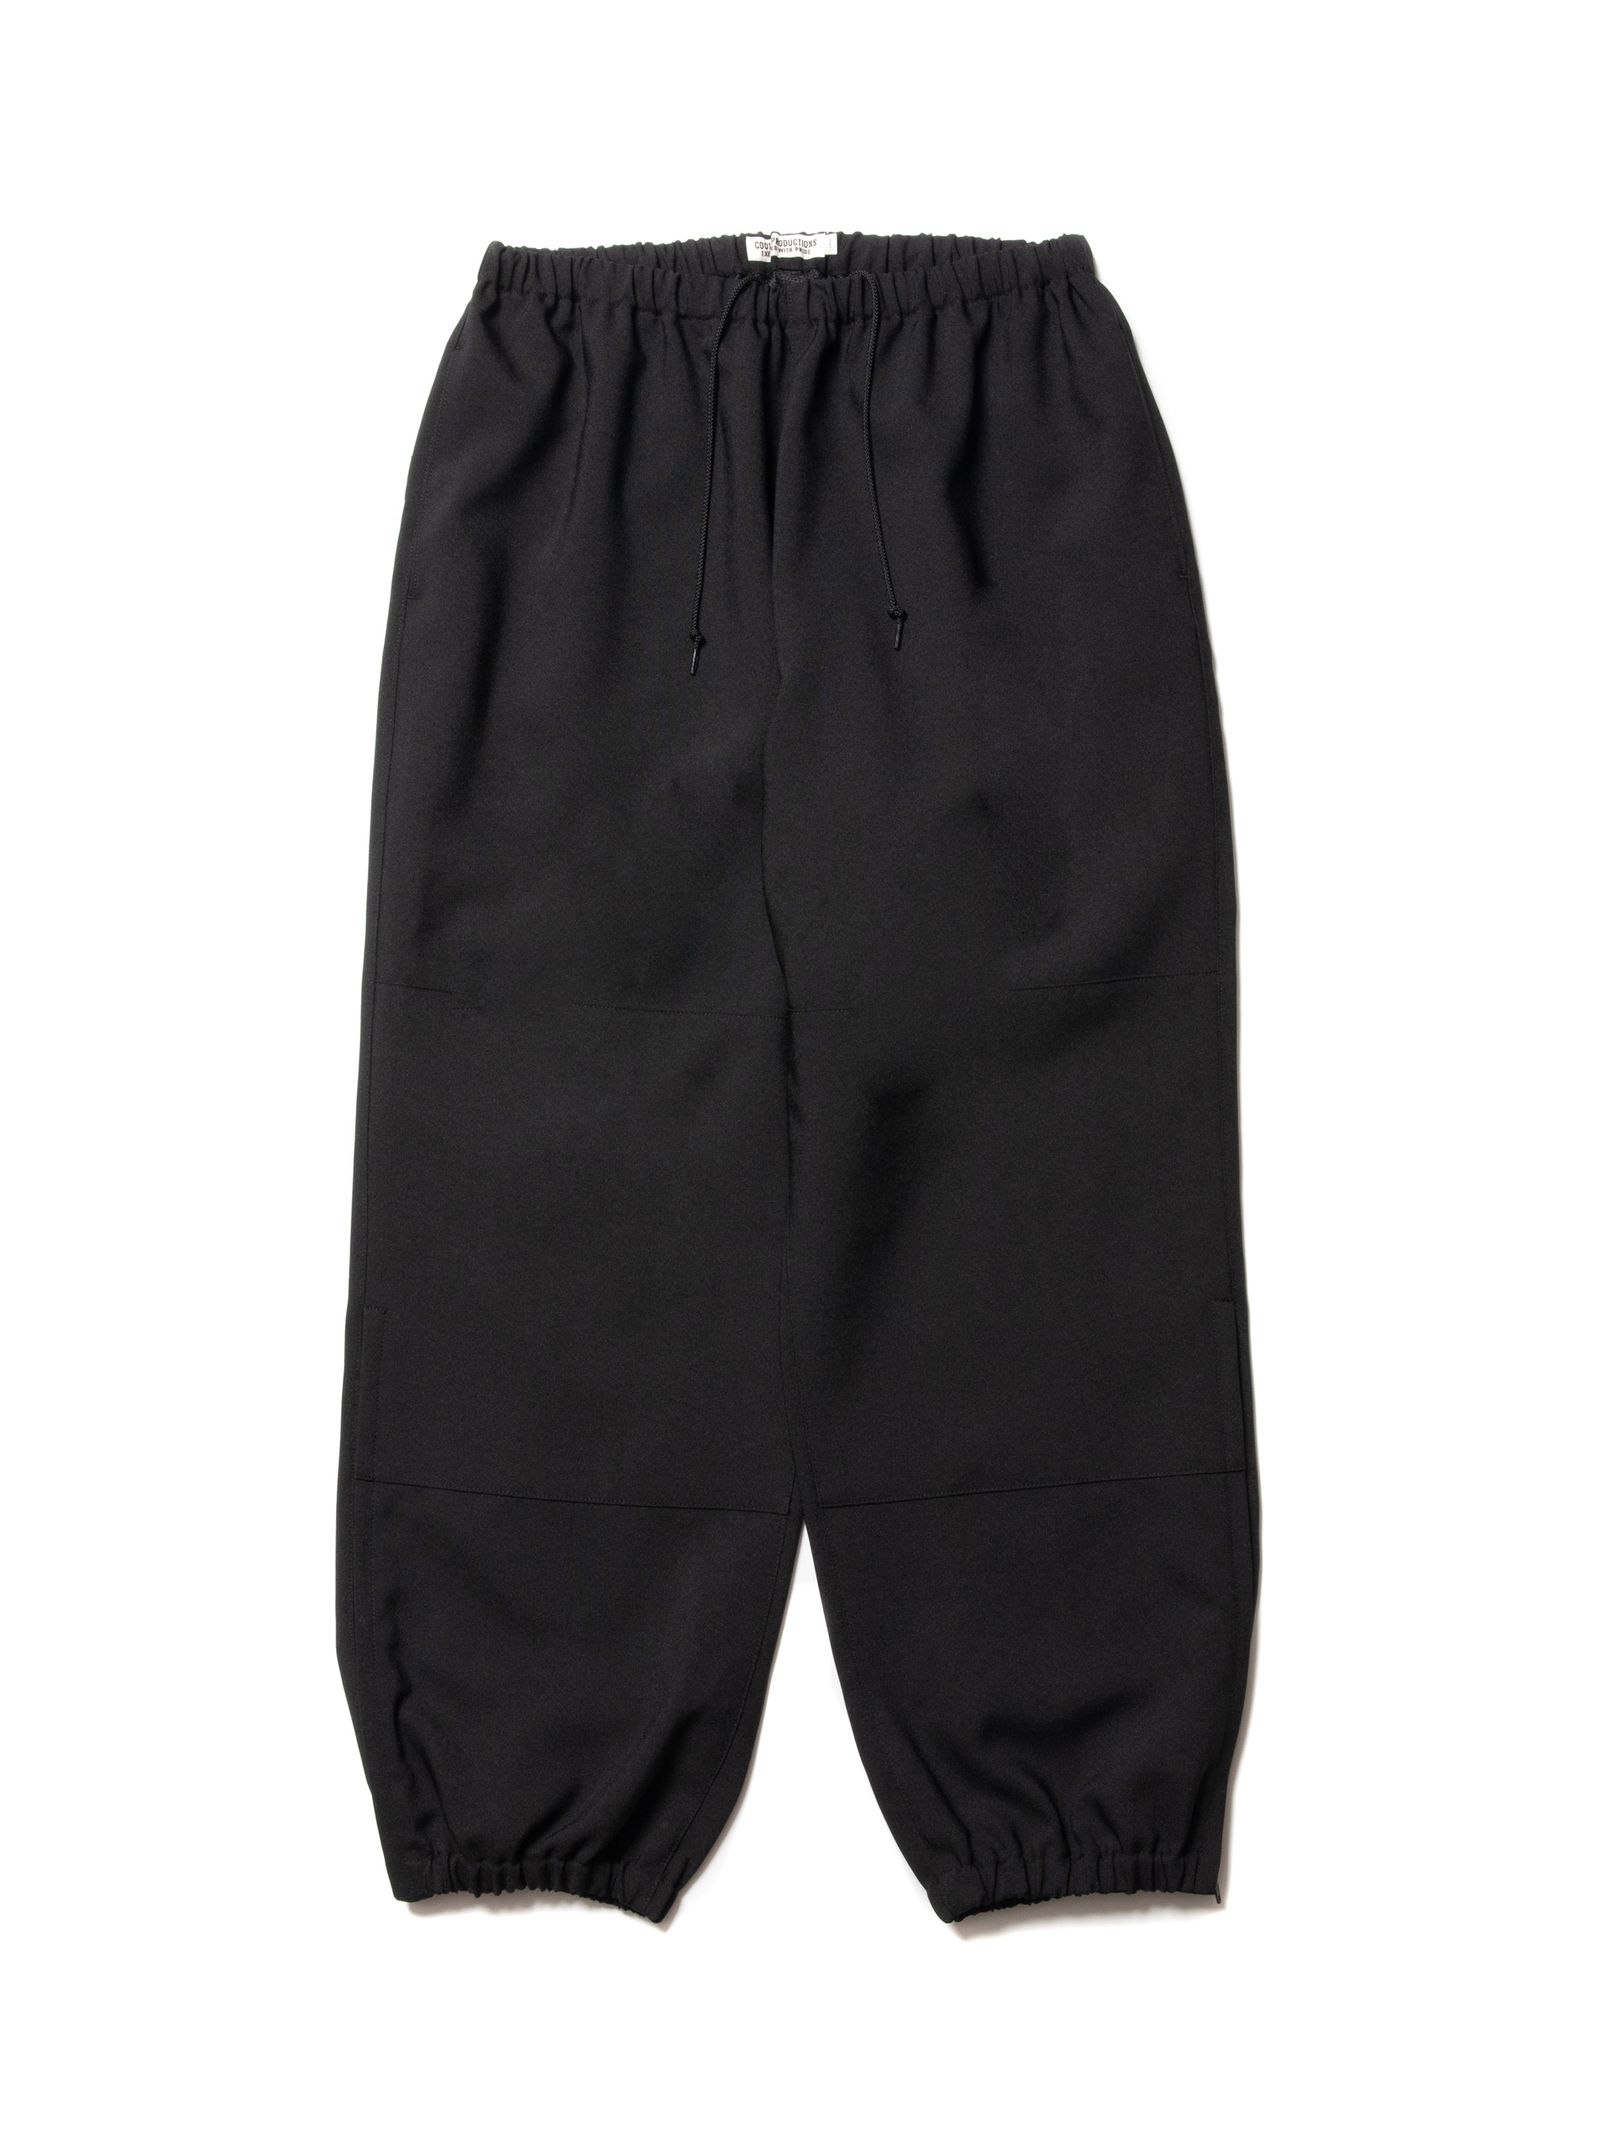 COOTIE PRODUCTIONS - Polyester OX Raza Track Pants (BLACK